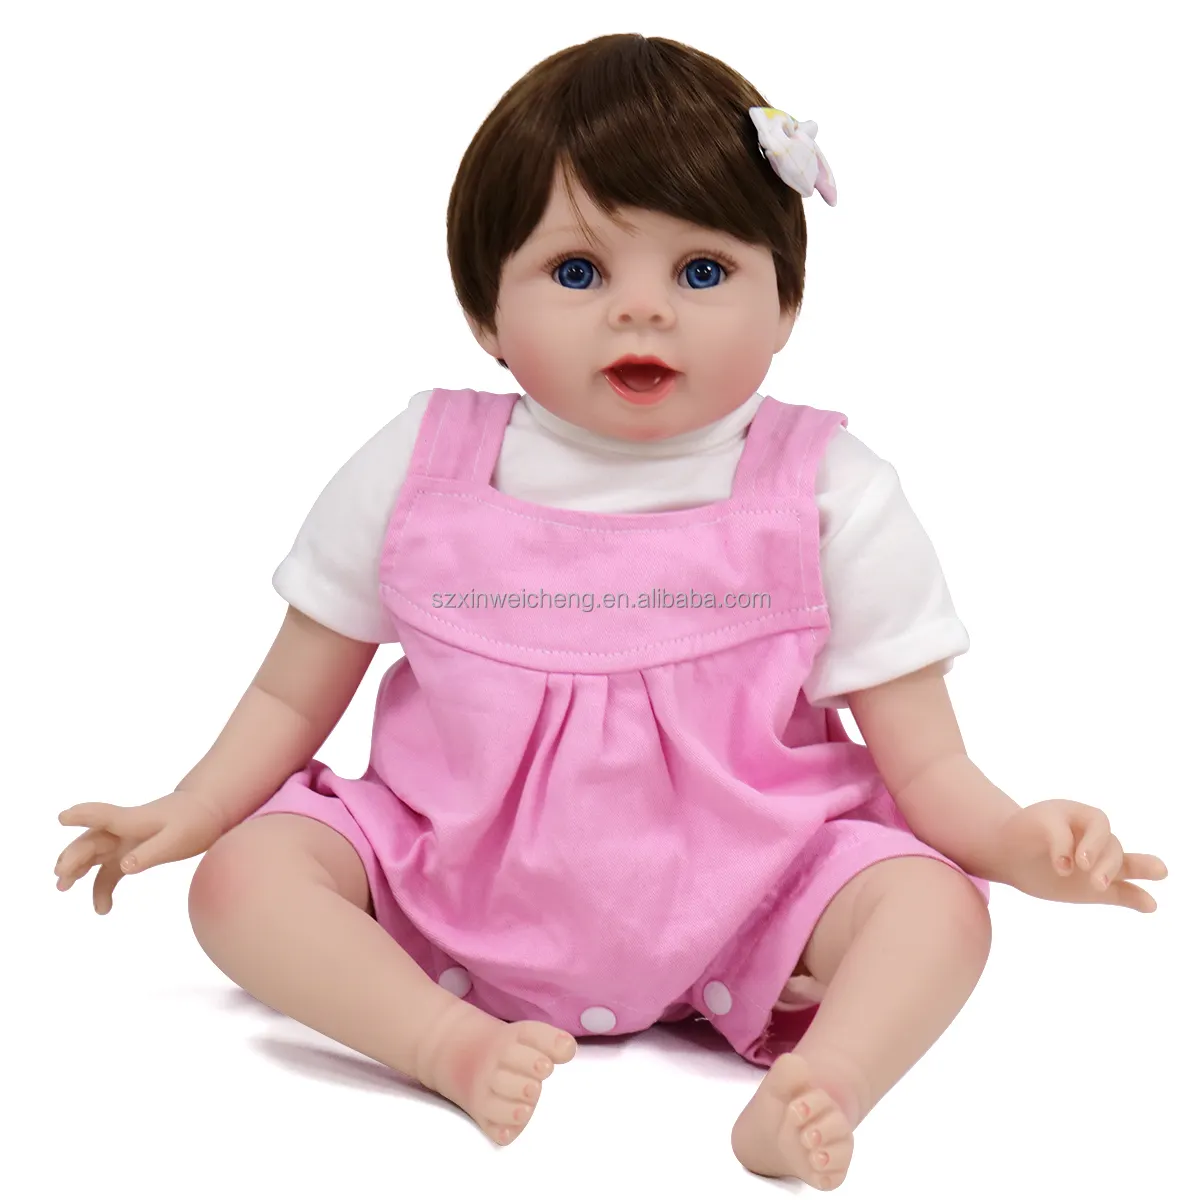 22 Inch Lifelike Premie Baby Short Wig Hair Reborn Doll Crafted Soft Weighted Body Look Real Smiling Realistic Newborn Doll